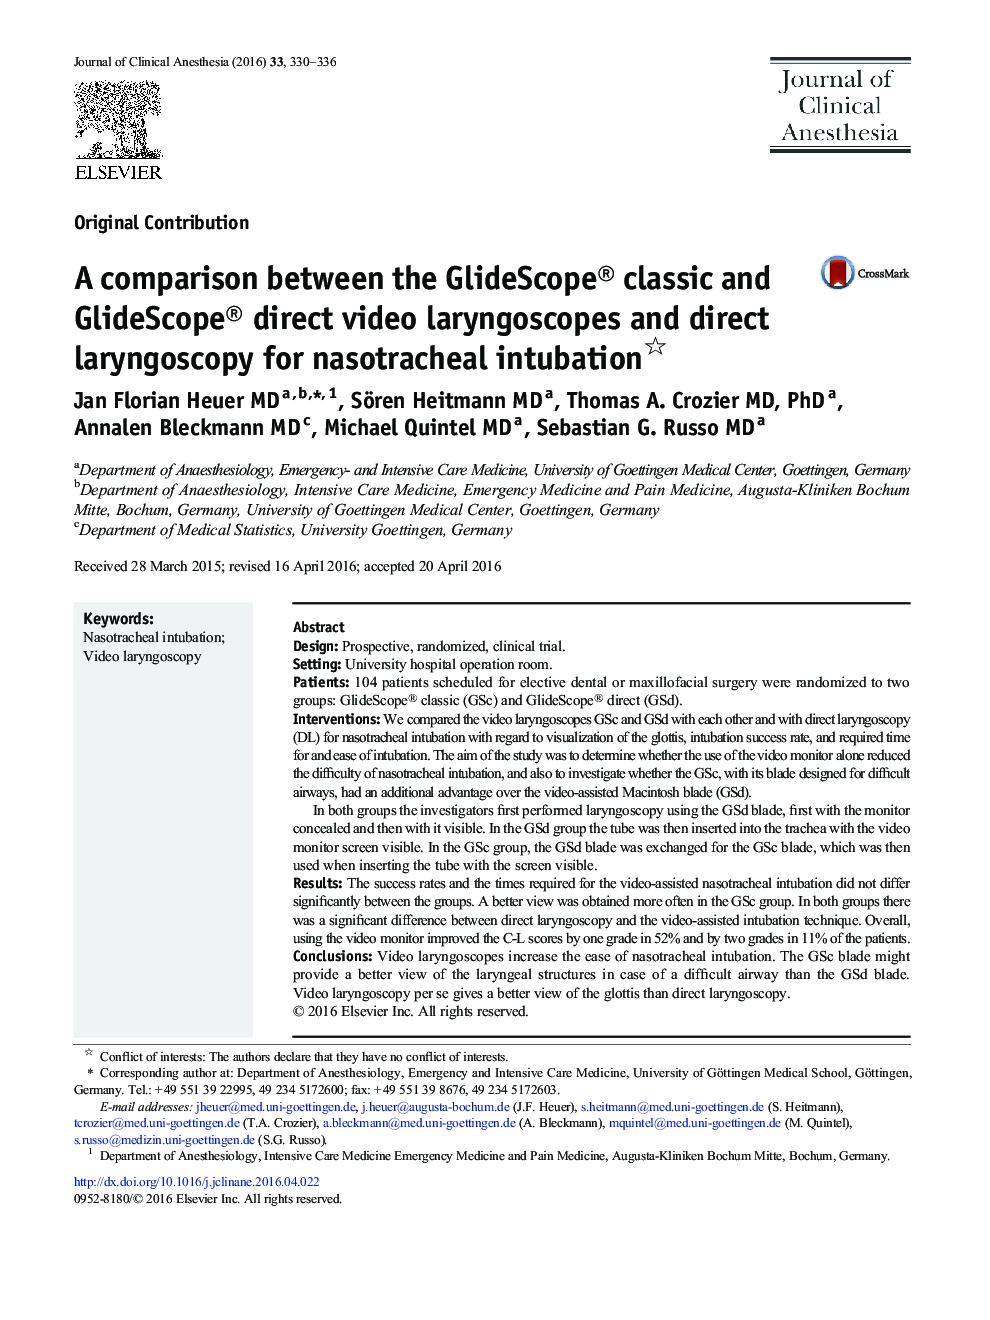 A comparison between the GlideScope® classic and GlideScope® direct video laryngoscopes and direct laryngoscopy for nasotracheal intubation 